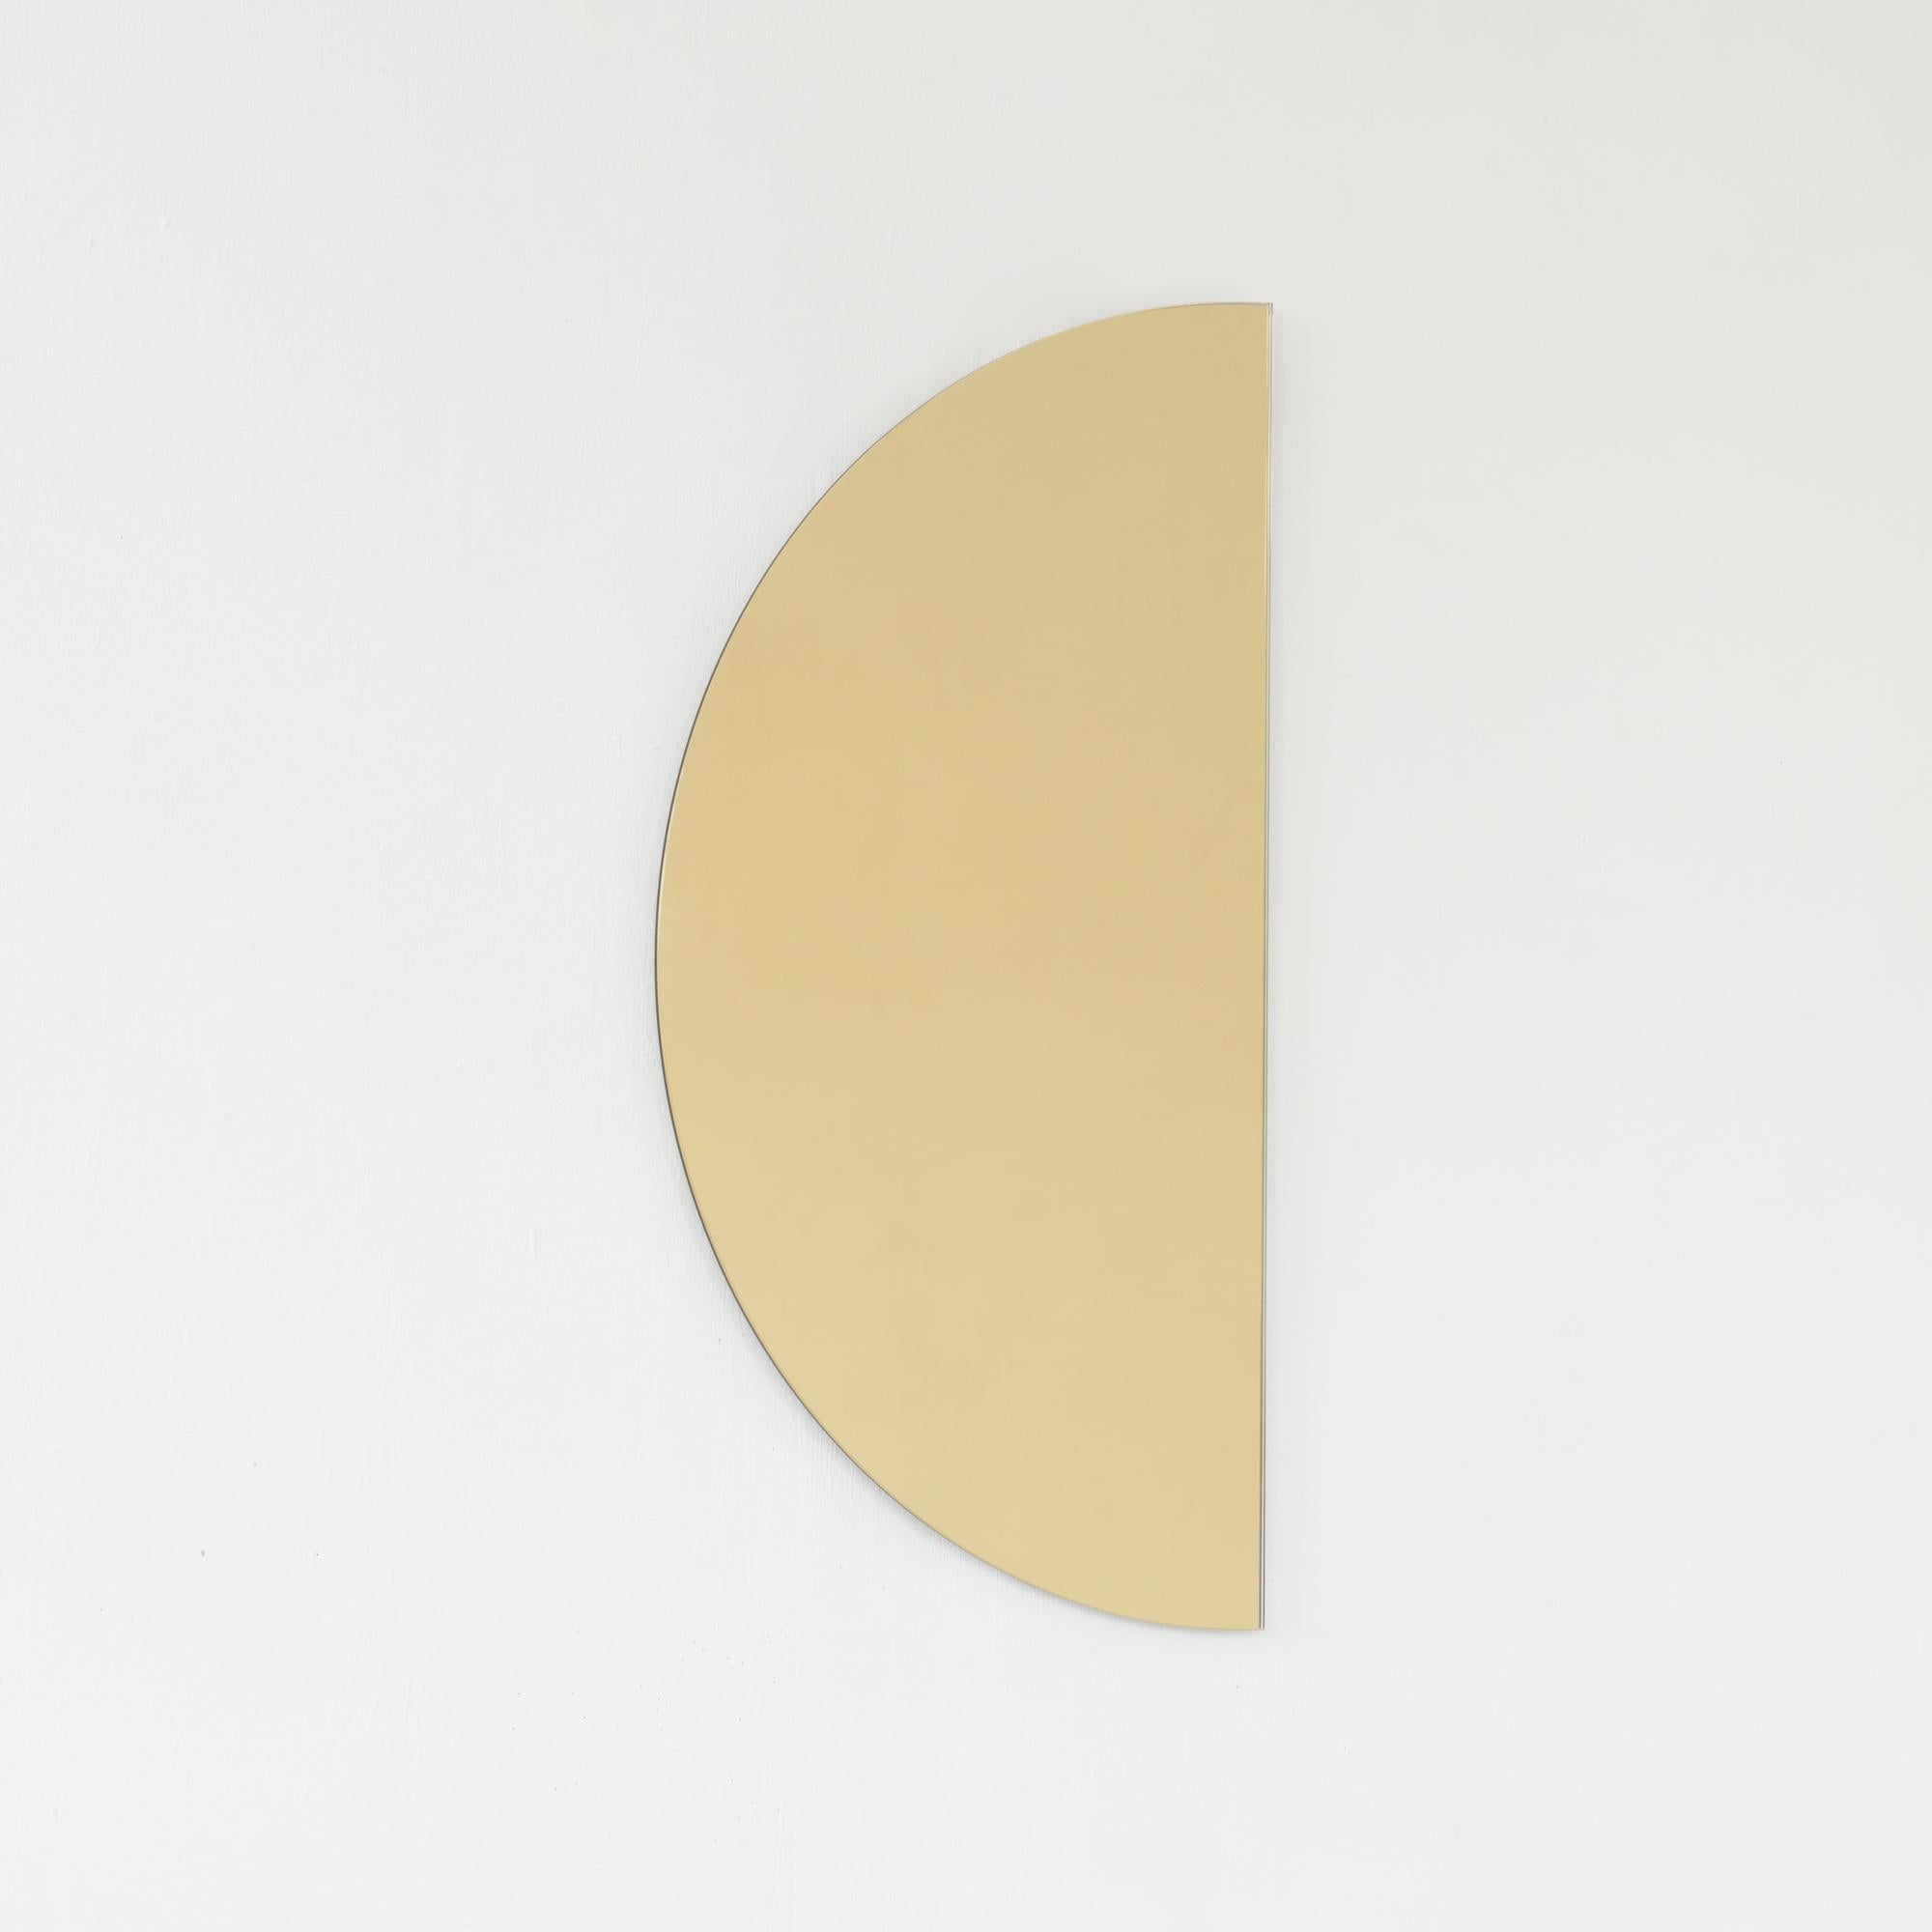 Luna Half-Moon Gold Tinted Frameless Contemporary Mirror, Regular In New Condition For Sale In London, GB